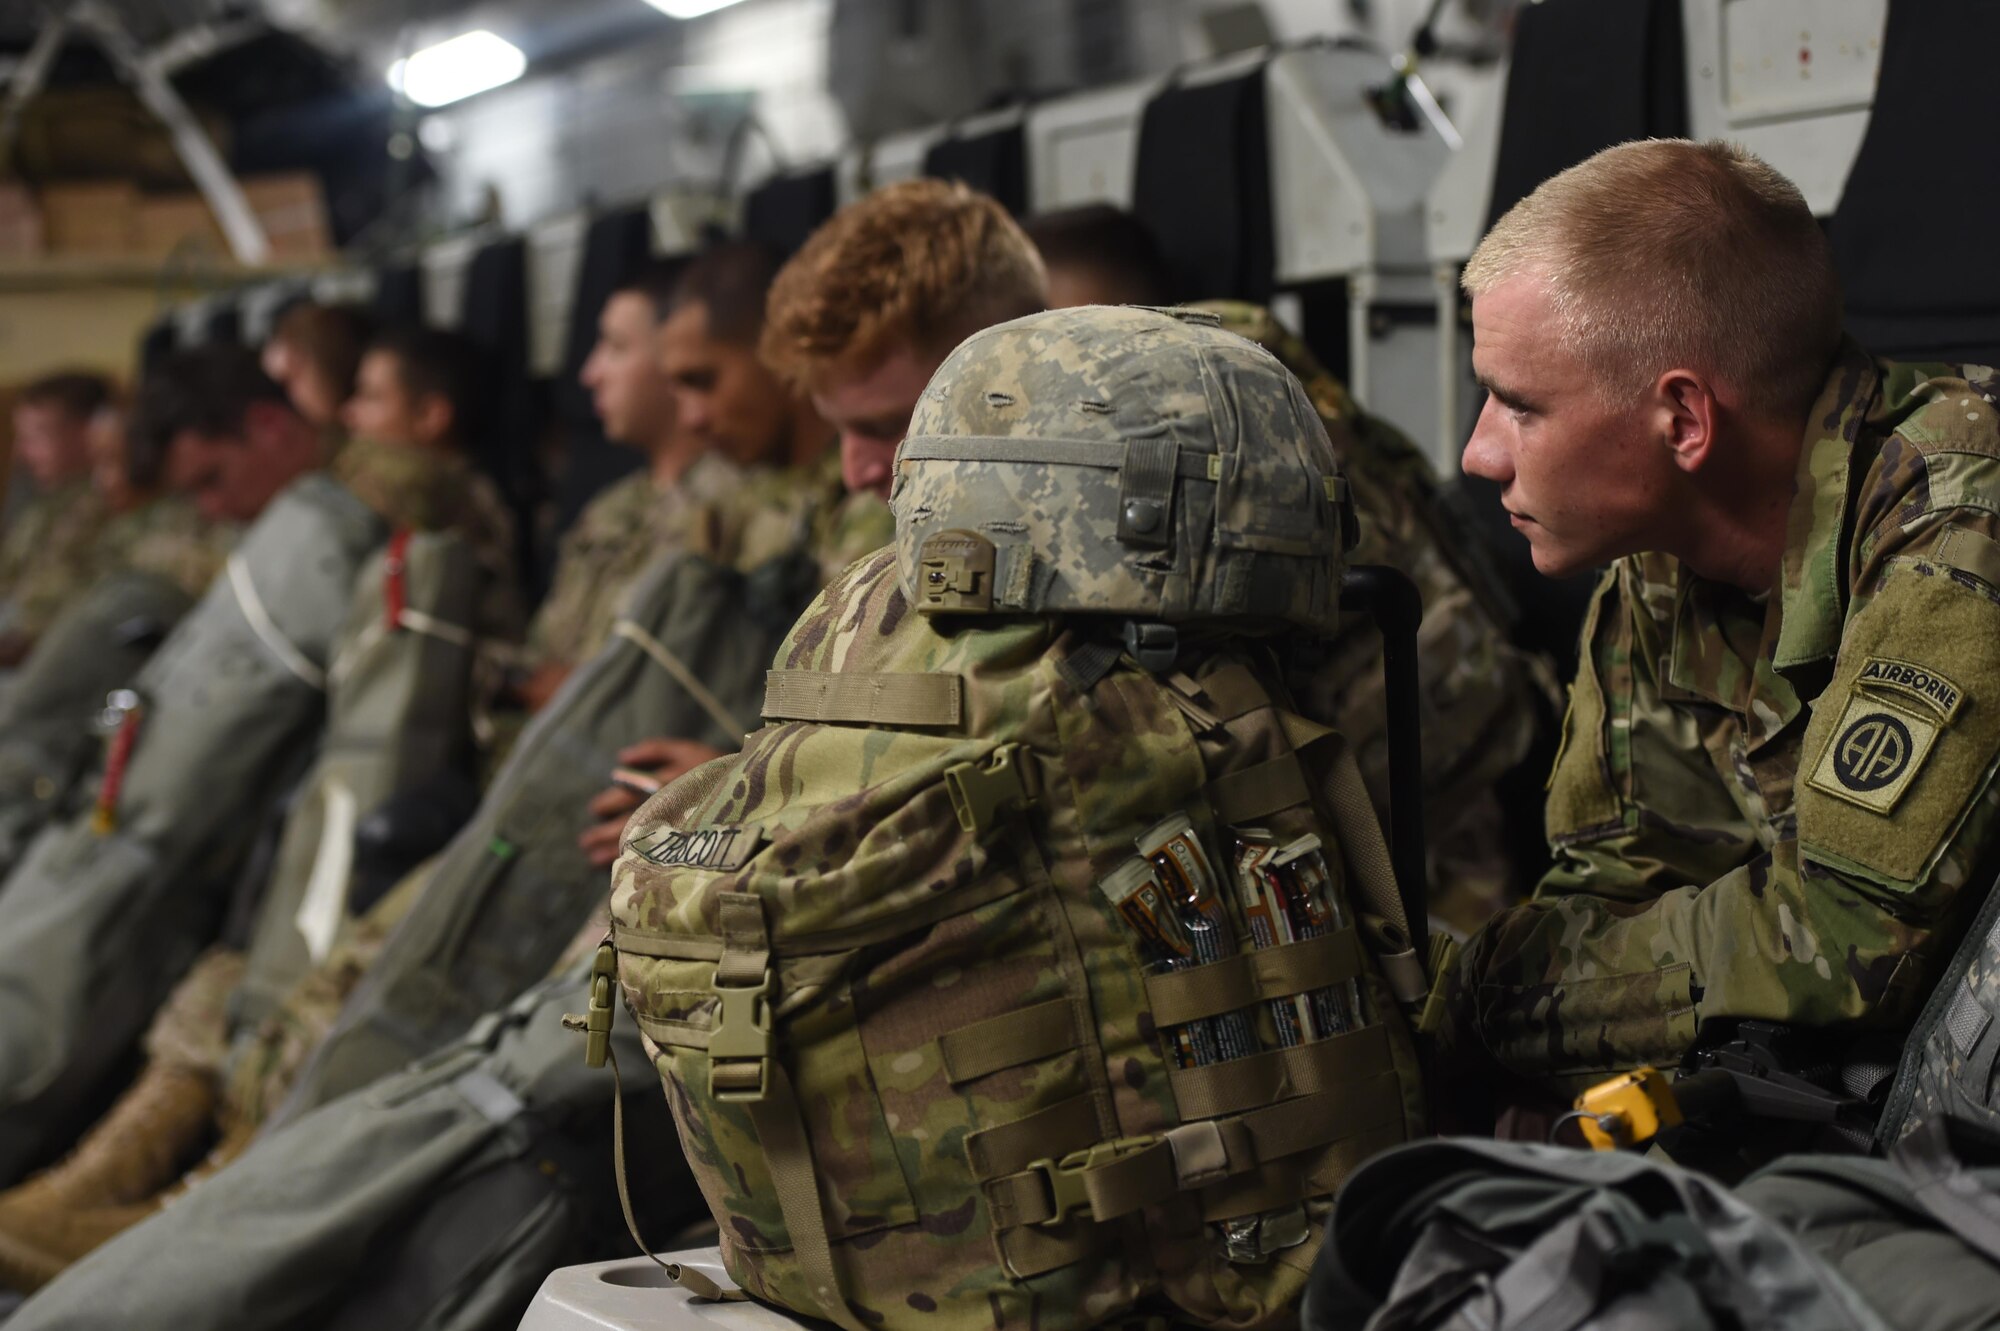 Army SPC. Dakota Truscott, 82nd Airborne Division sits on a 62nd Airlift Wing C-17 Globemaster III at Pope Army Air Field, N.C., on June 6, 2016. The 62 AW provided three C-17’s to conduct equipment and personnel air drops in Poland for Exercise Swift Response 2016. (Air Force photo/Staff Sgt. Naomi Shipley)